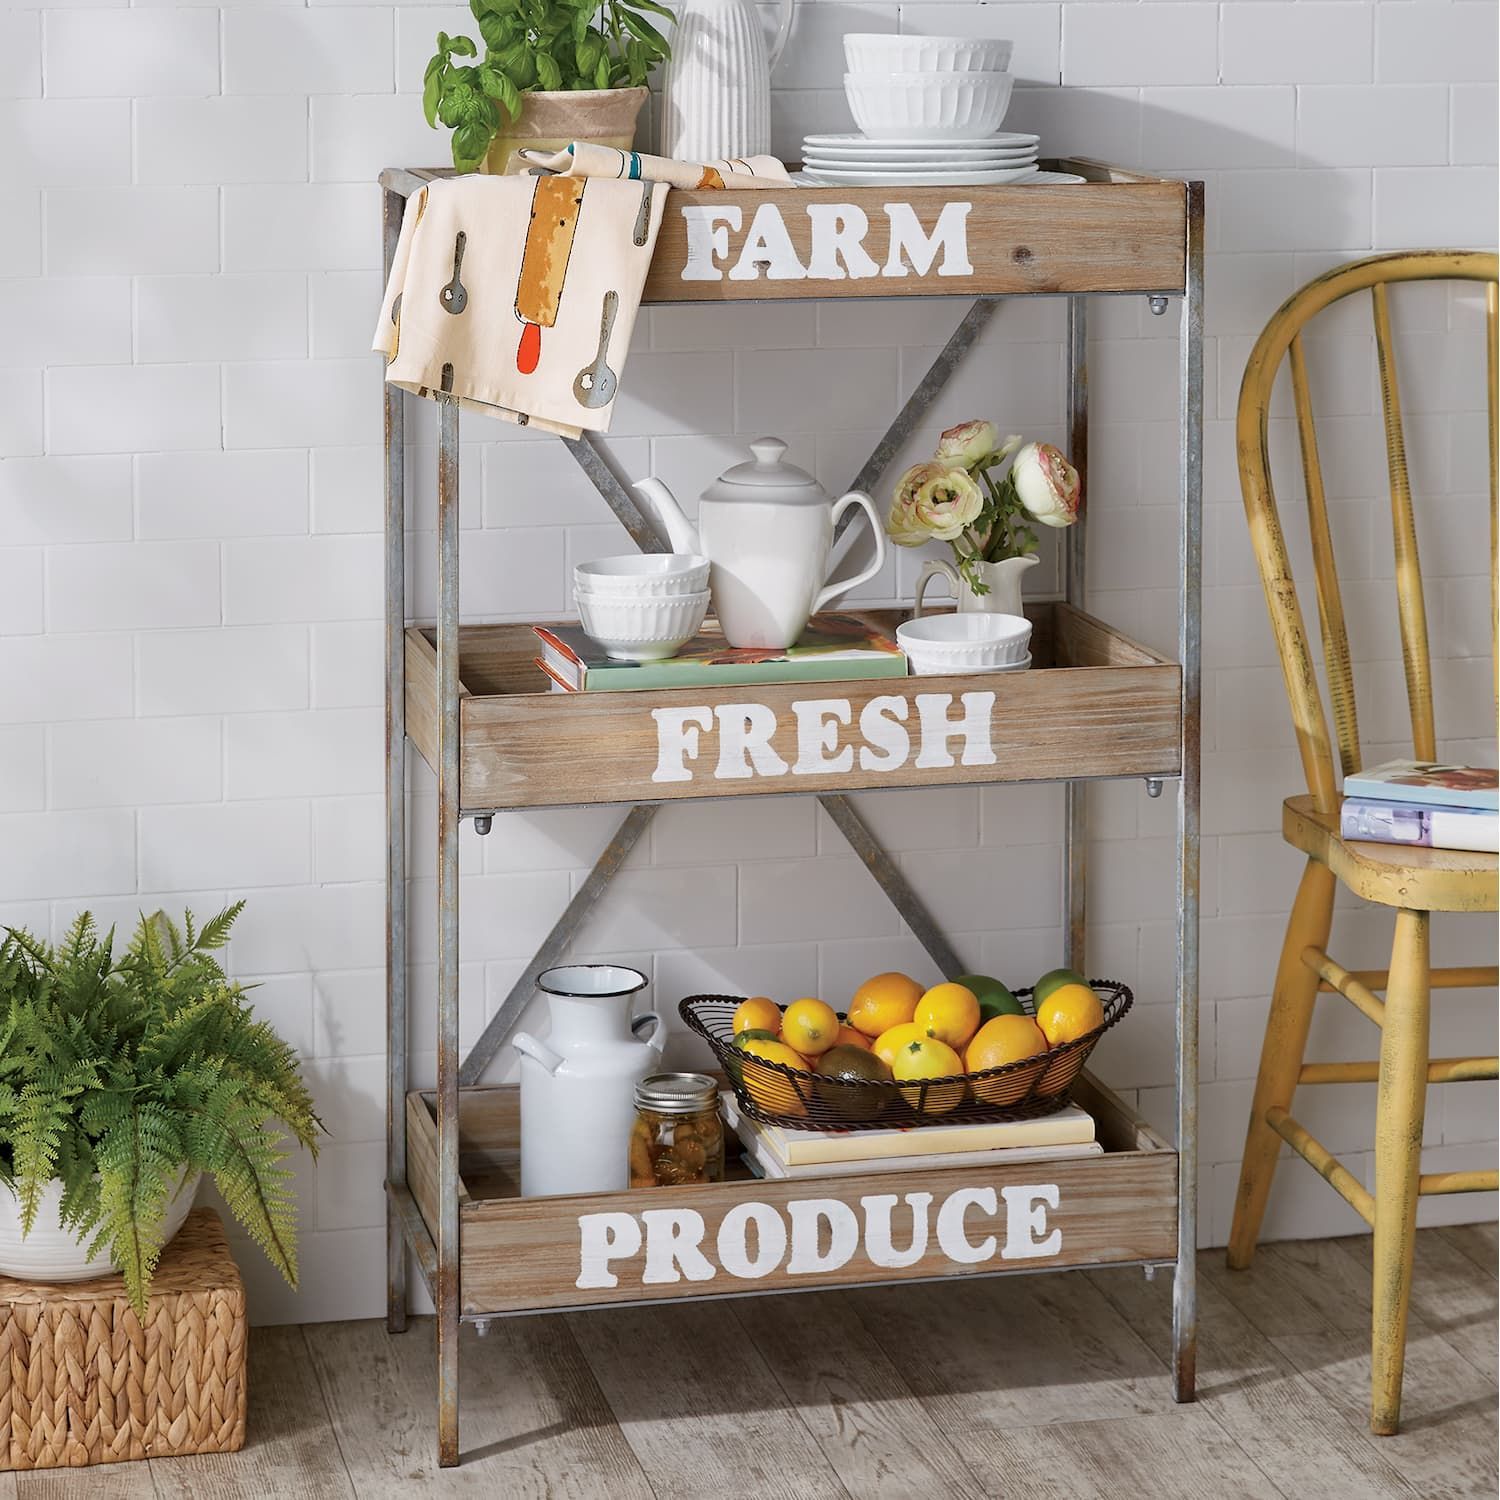 Farm Fresh Produce Shelf | Country Door | Farm Fresh Produce, Kitchen For Farmhouse Stands With Shelves (Gallery 10 of 20)